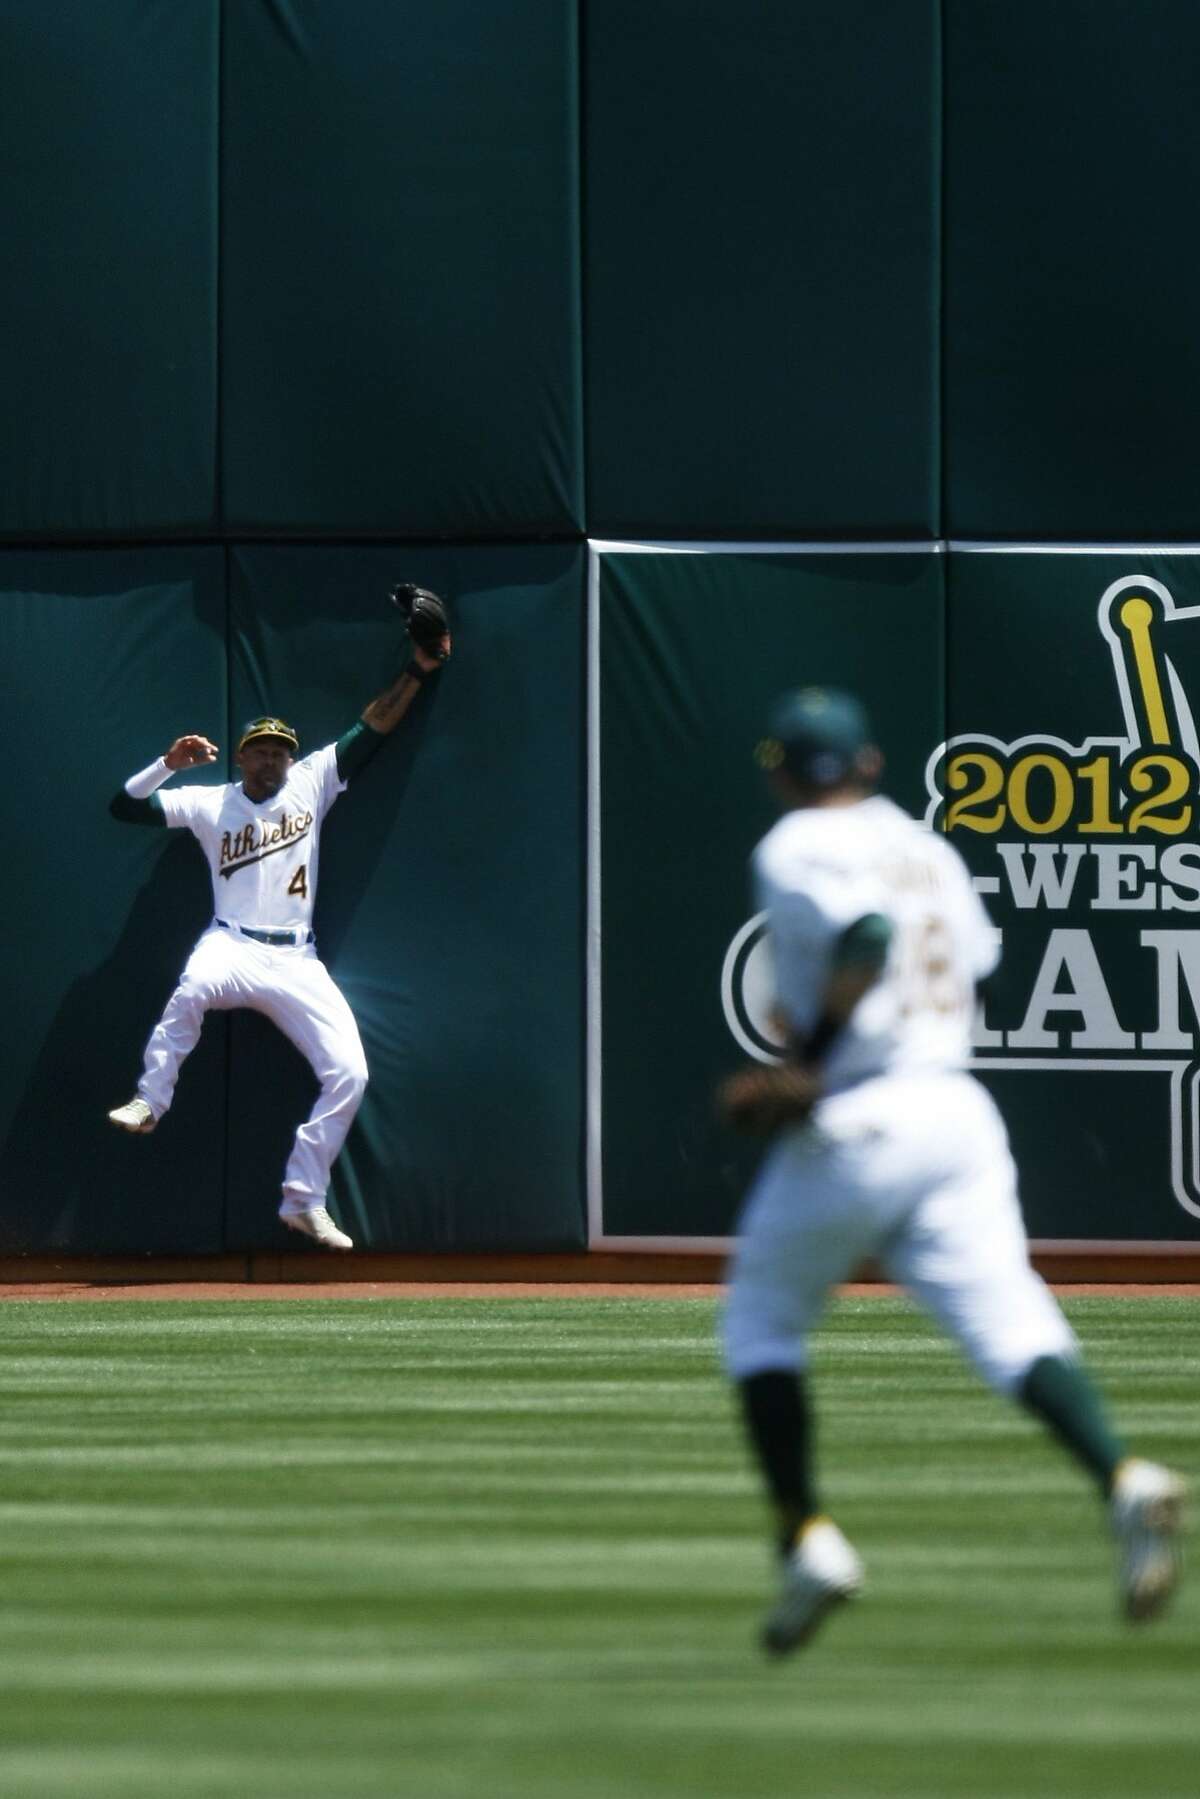 The Athletics' Coco Crisp catches a fly ball from The Mariners' Kyle Seager during the fourth inning of a game between the Oakland A's and the Seattle Mariners at O.co Coliseum on May 7, 2014 in Oakland, Calif. Coco Crisp was injured and taken out of the game on the play.